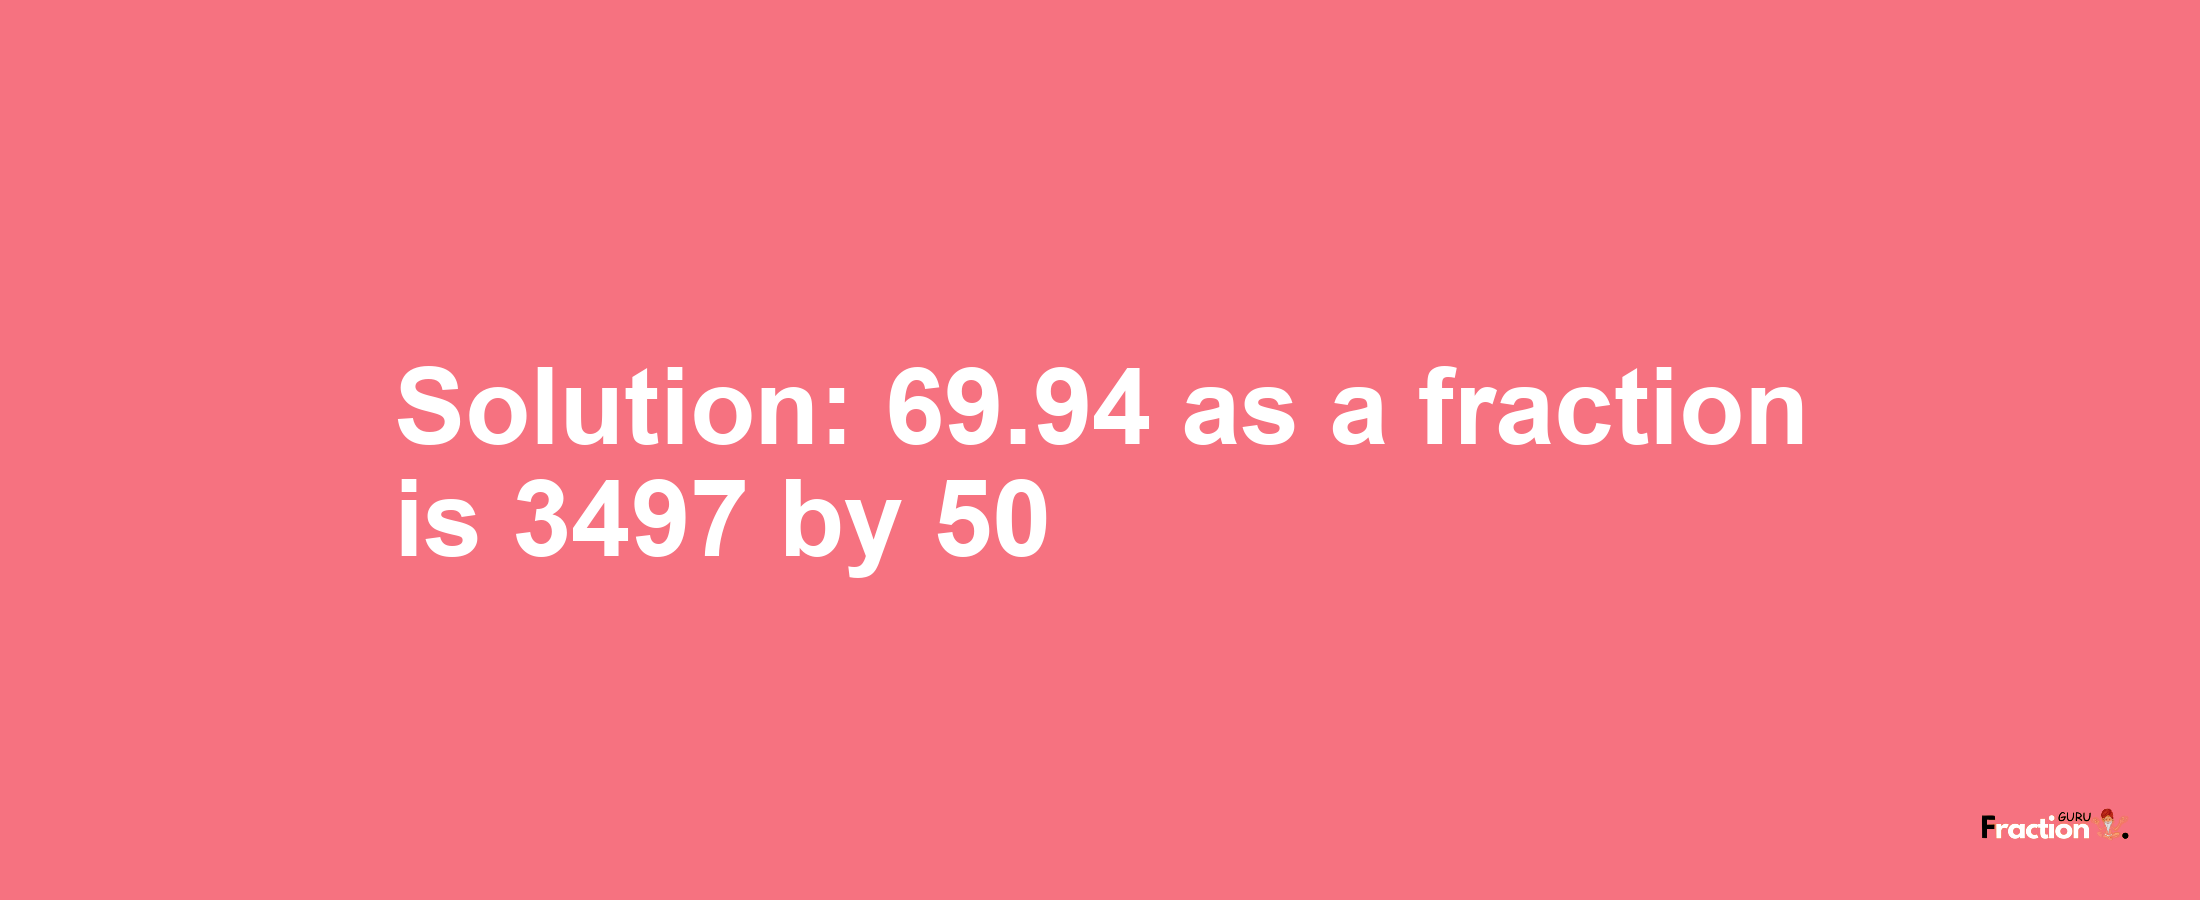 Solution:69.94 as a fraction is 3497/50